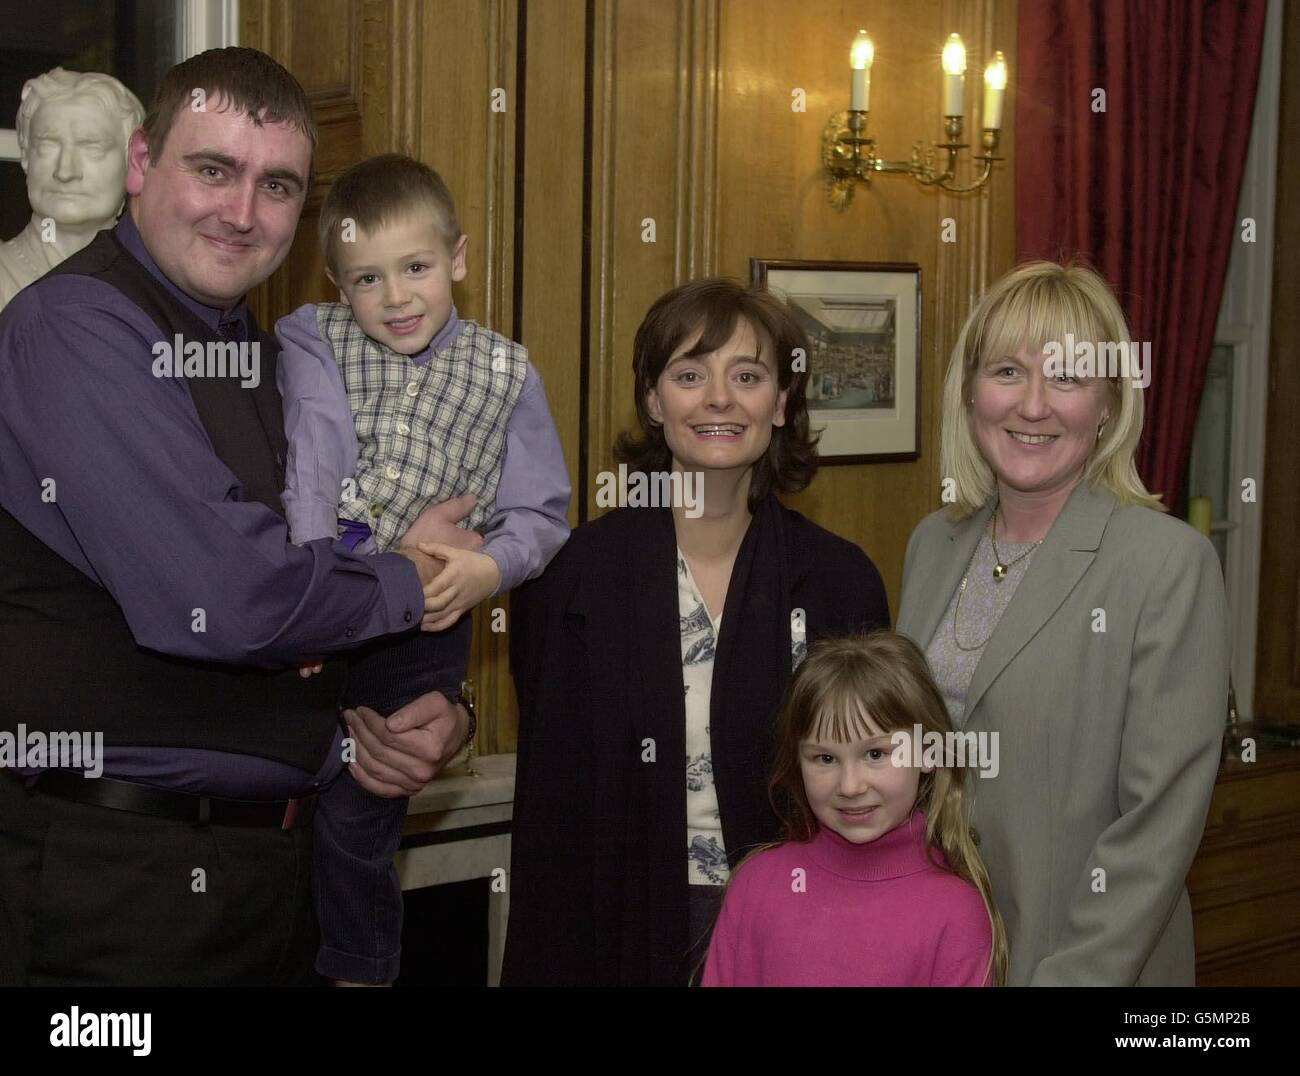 The Prime Minister's wife Cherie Blair with Police widow Mrs Heather Jones, at No.10 Downing Street this evening . PC Steve Jones, was killed while trying to stop a car theft, while serving for the Avon and Somerset Police Force in May 1999. * Mrs Jones took her son Kieran, and daughter Bronwen, and a family friend Mark Jones (left), for tea and chat with Mrs Blair. Stock Photo